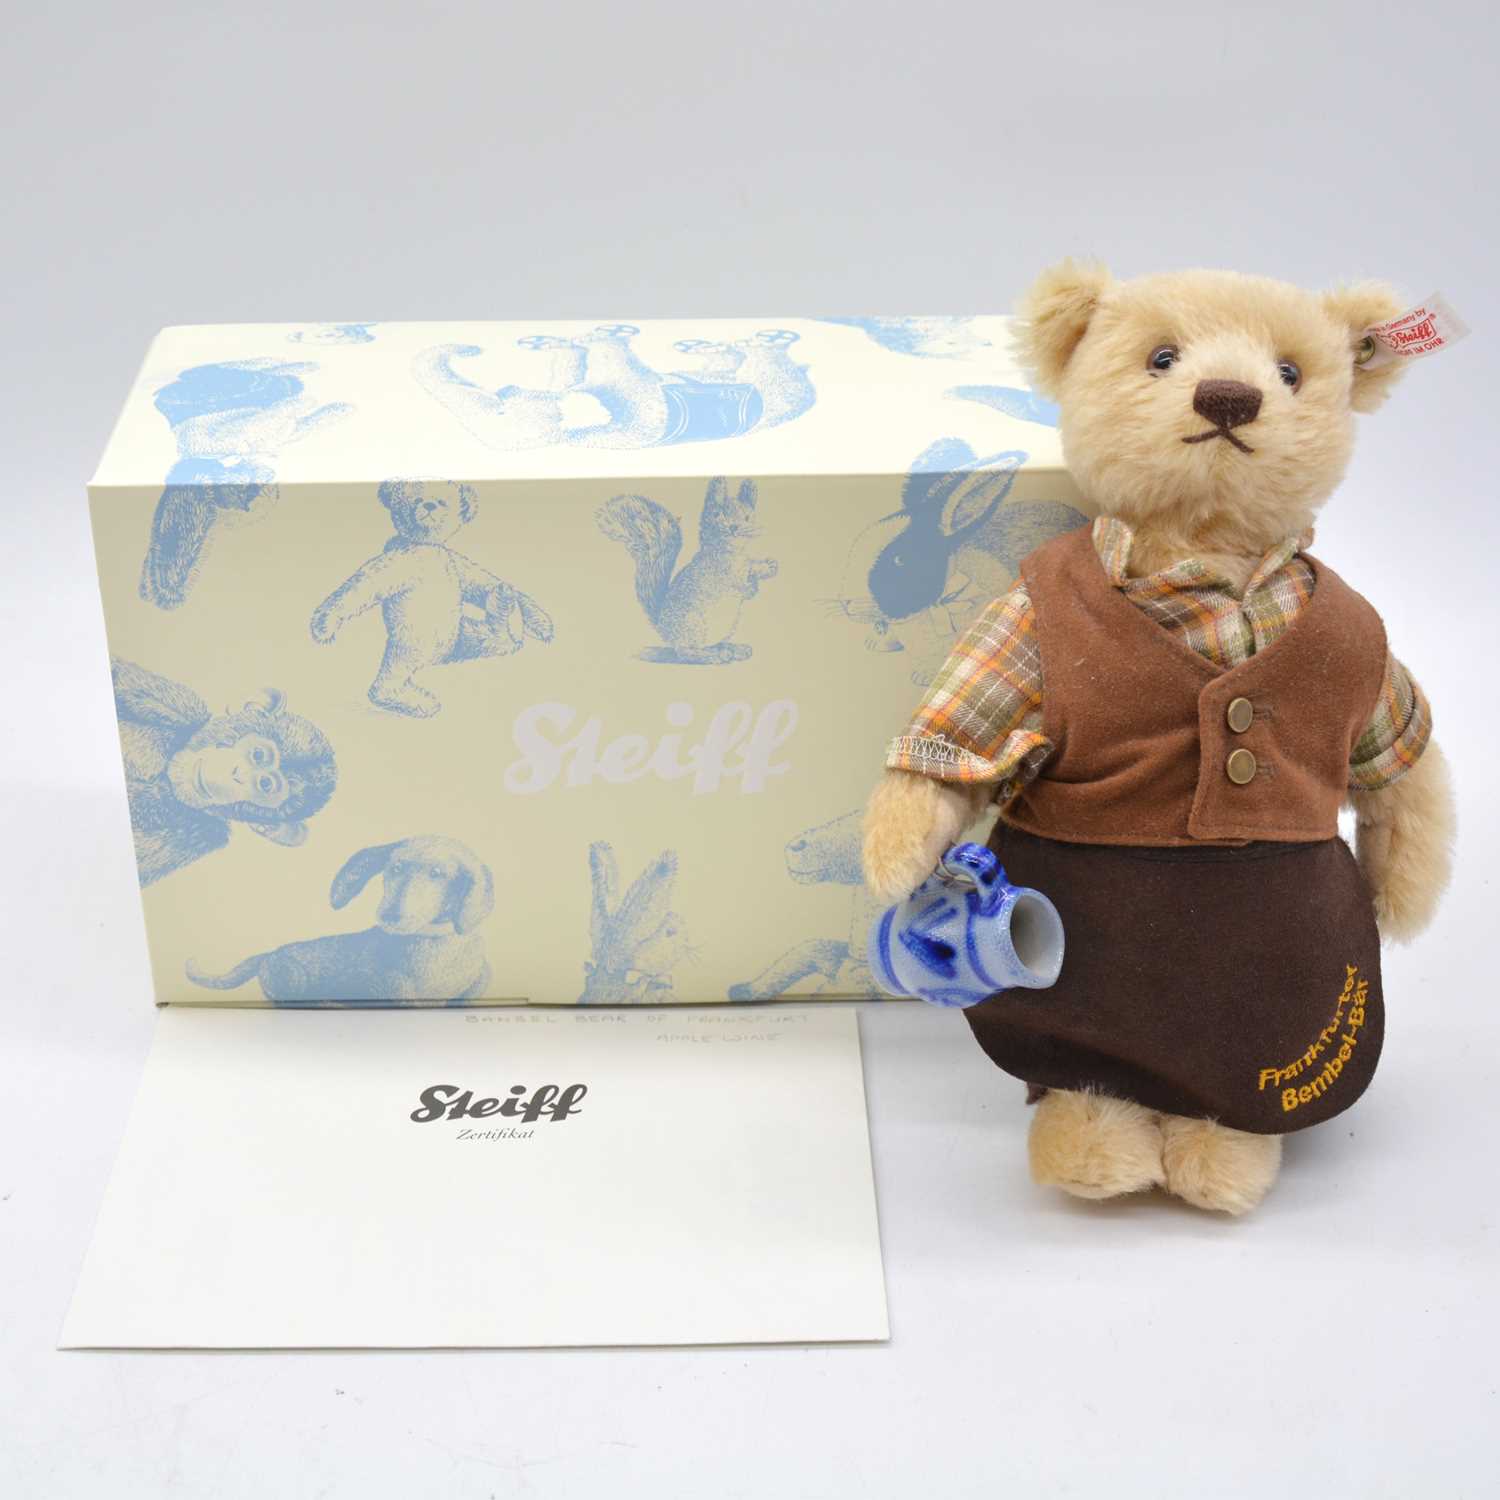 Steiff Germany teddy bear, 673436 'Appelwoi', boxed with certificate.